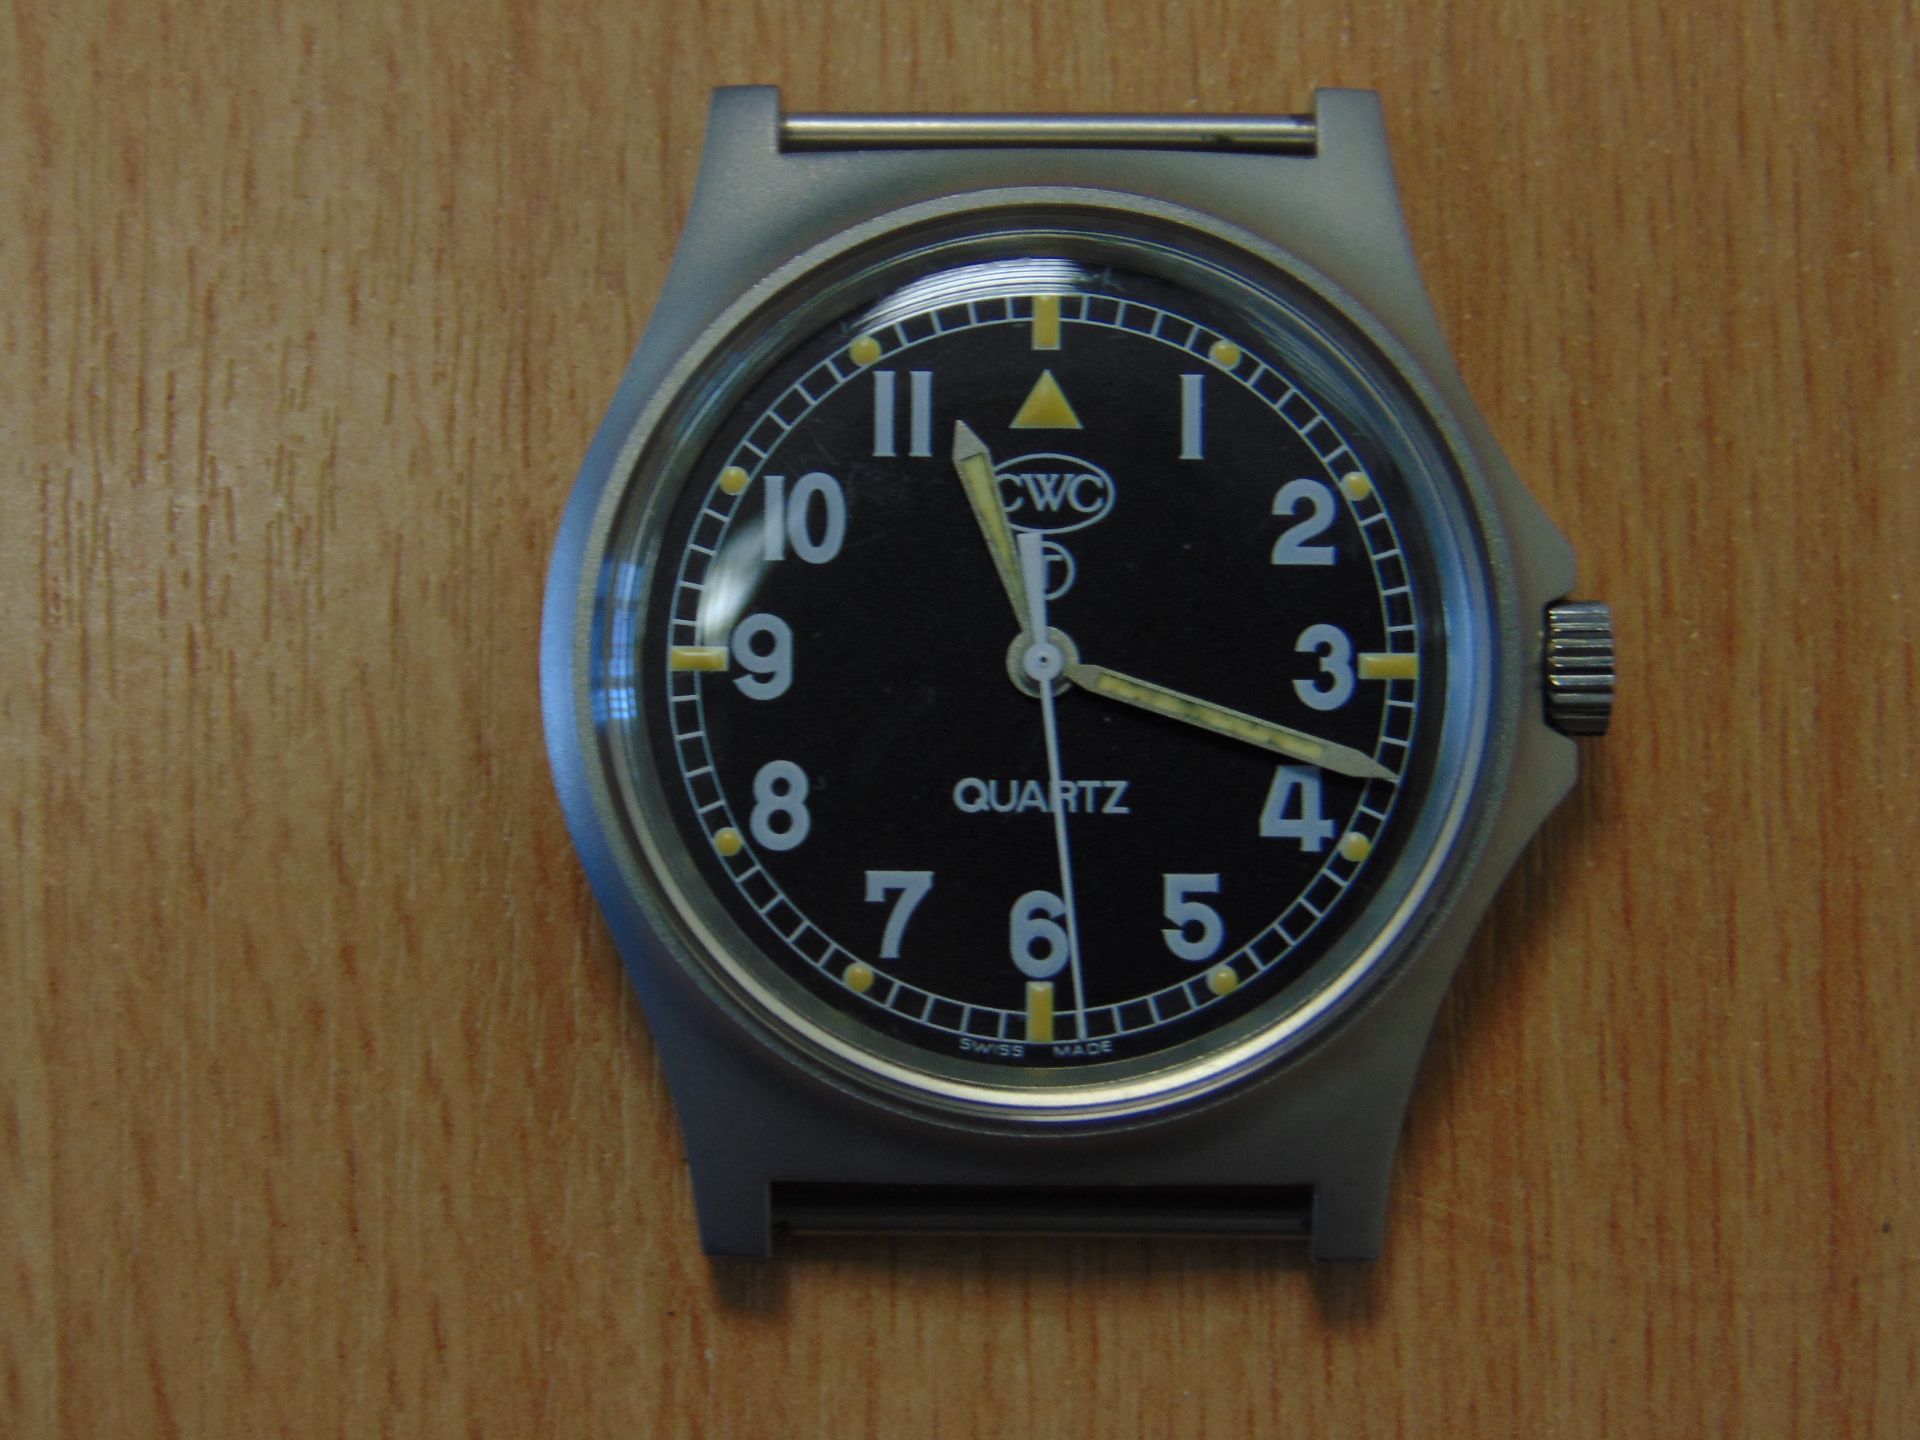 UNISSUED CWC W10 SERVICE WATCH -WATER RESISTENT TO 5ATM NATO MARKED DATED 2006 - Image 3 of 10